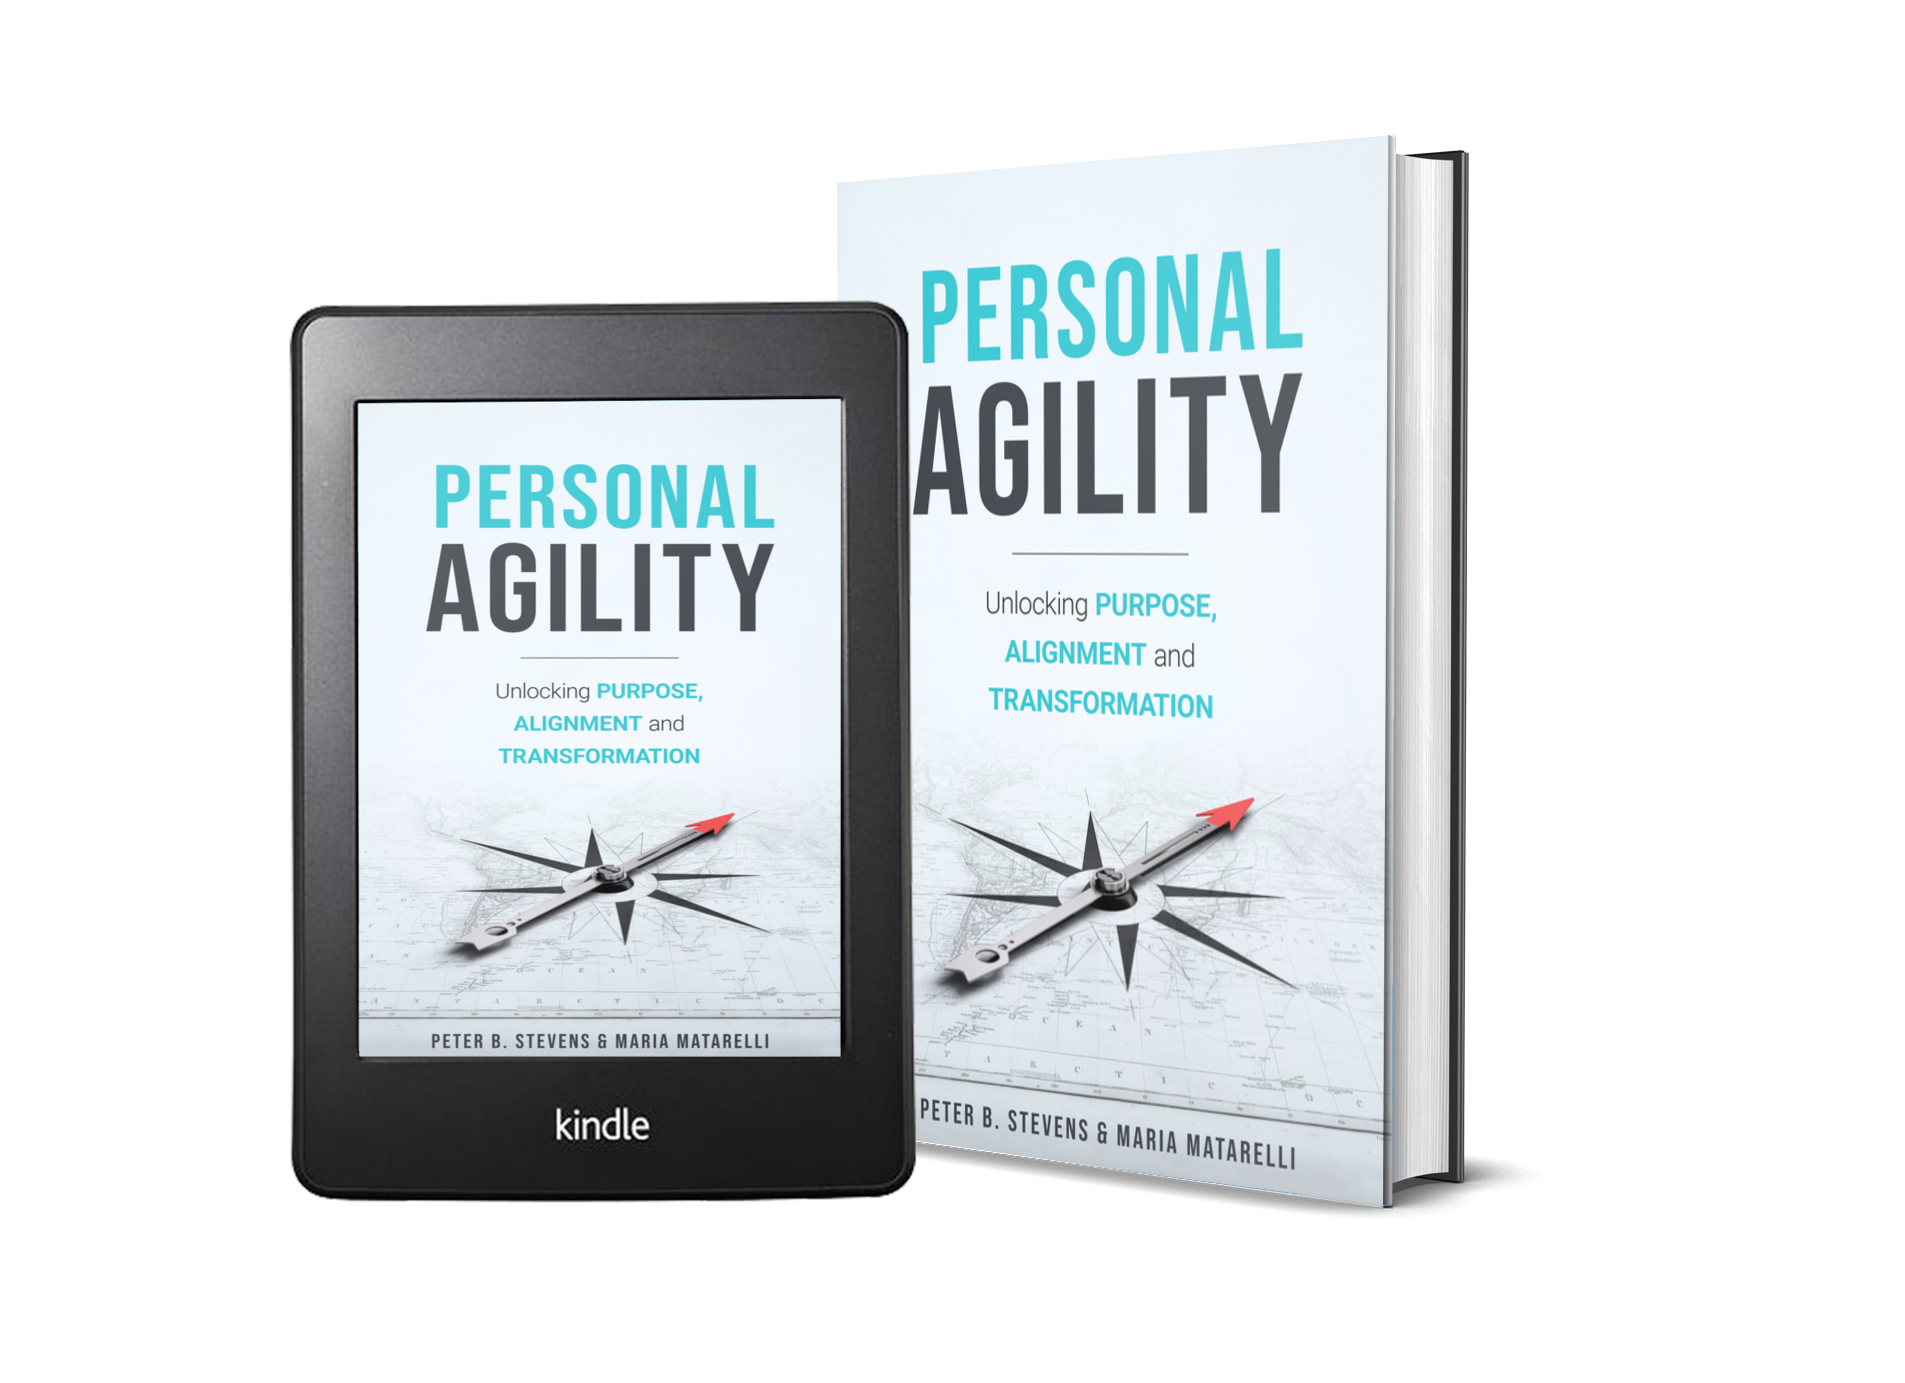 Personal Agility: Unlocking Purpose, Alignment and Transformation